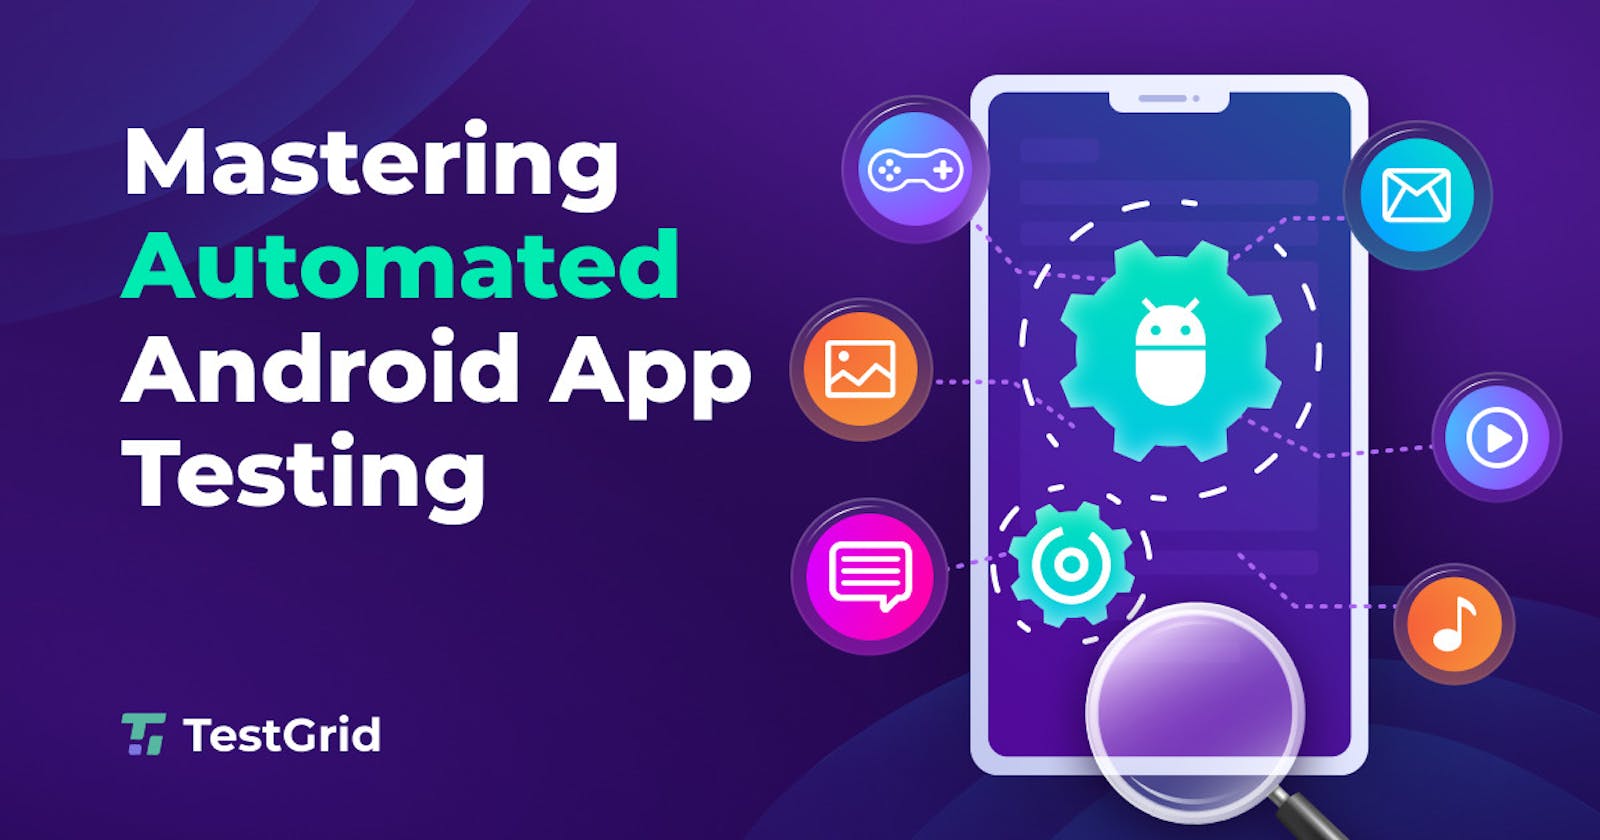 Mastering Automated Android App Testing